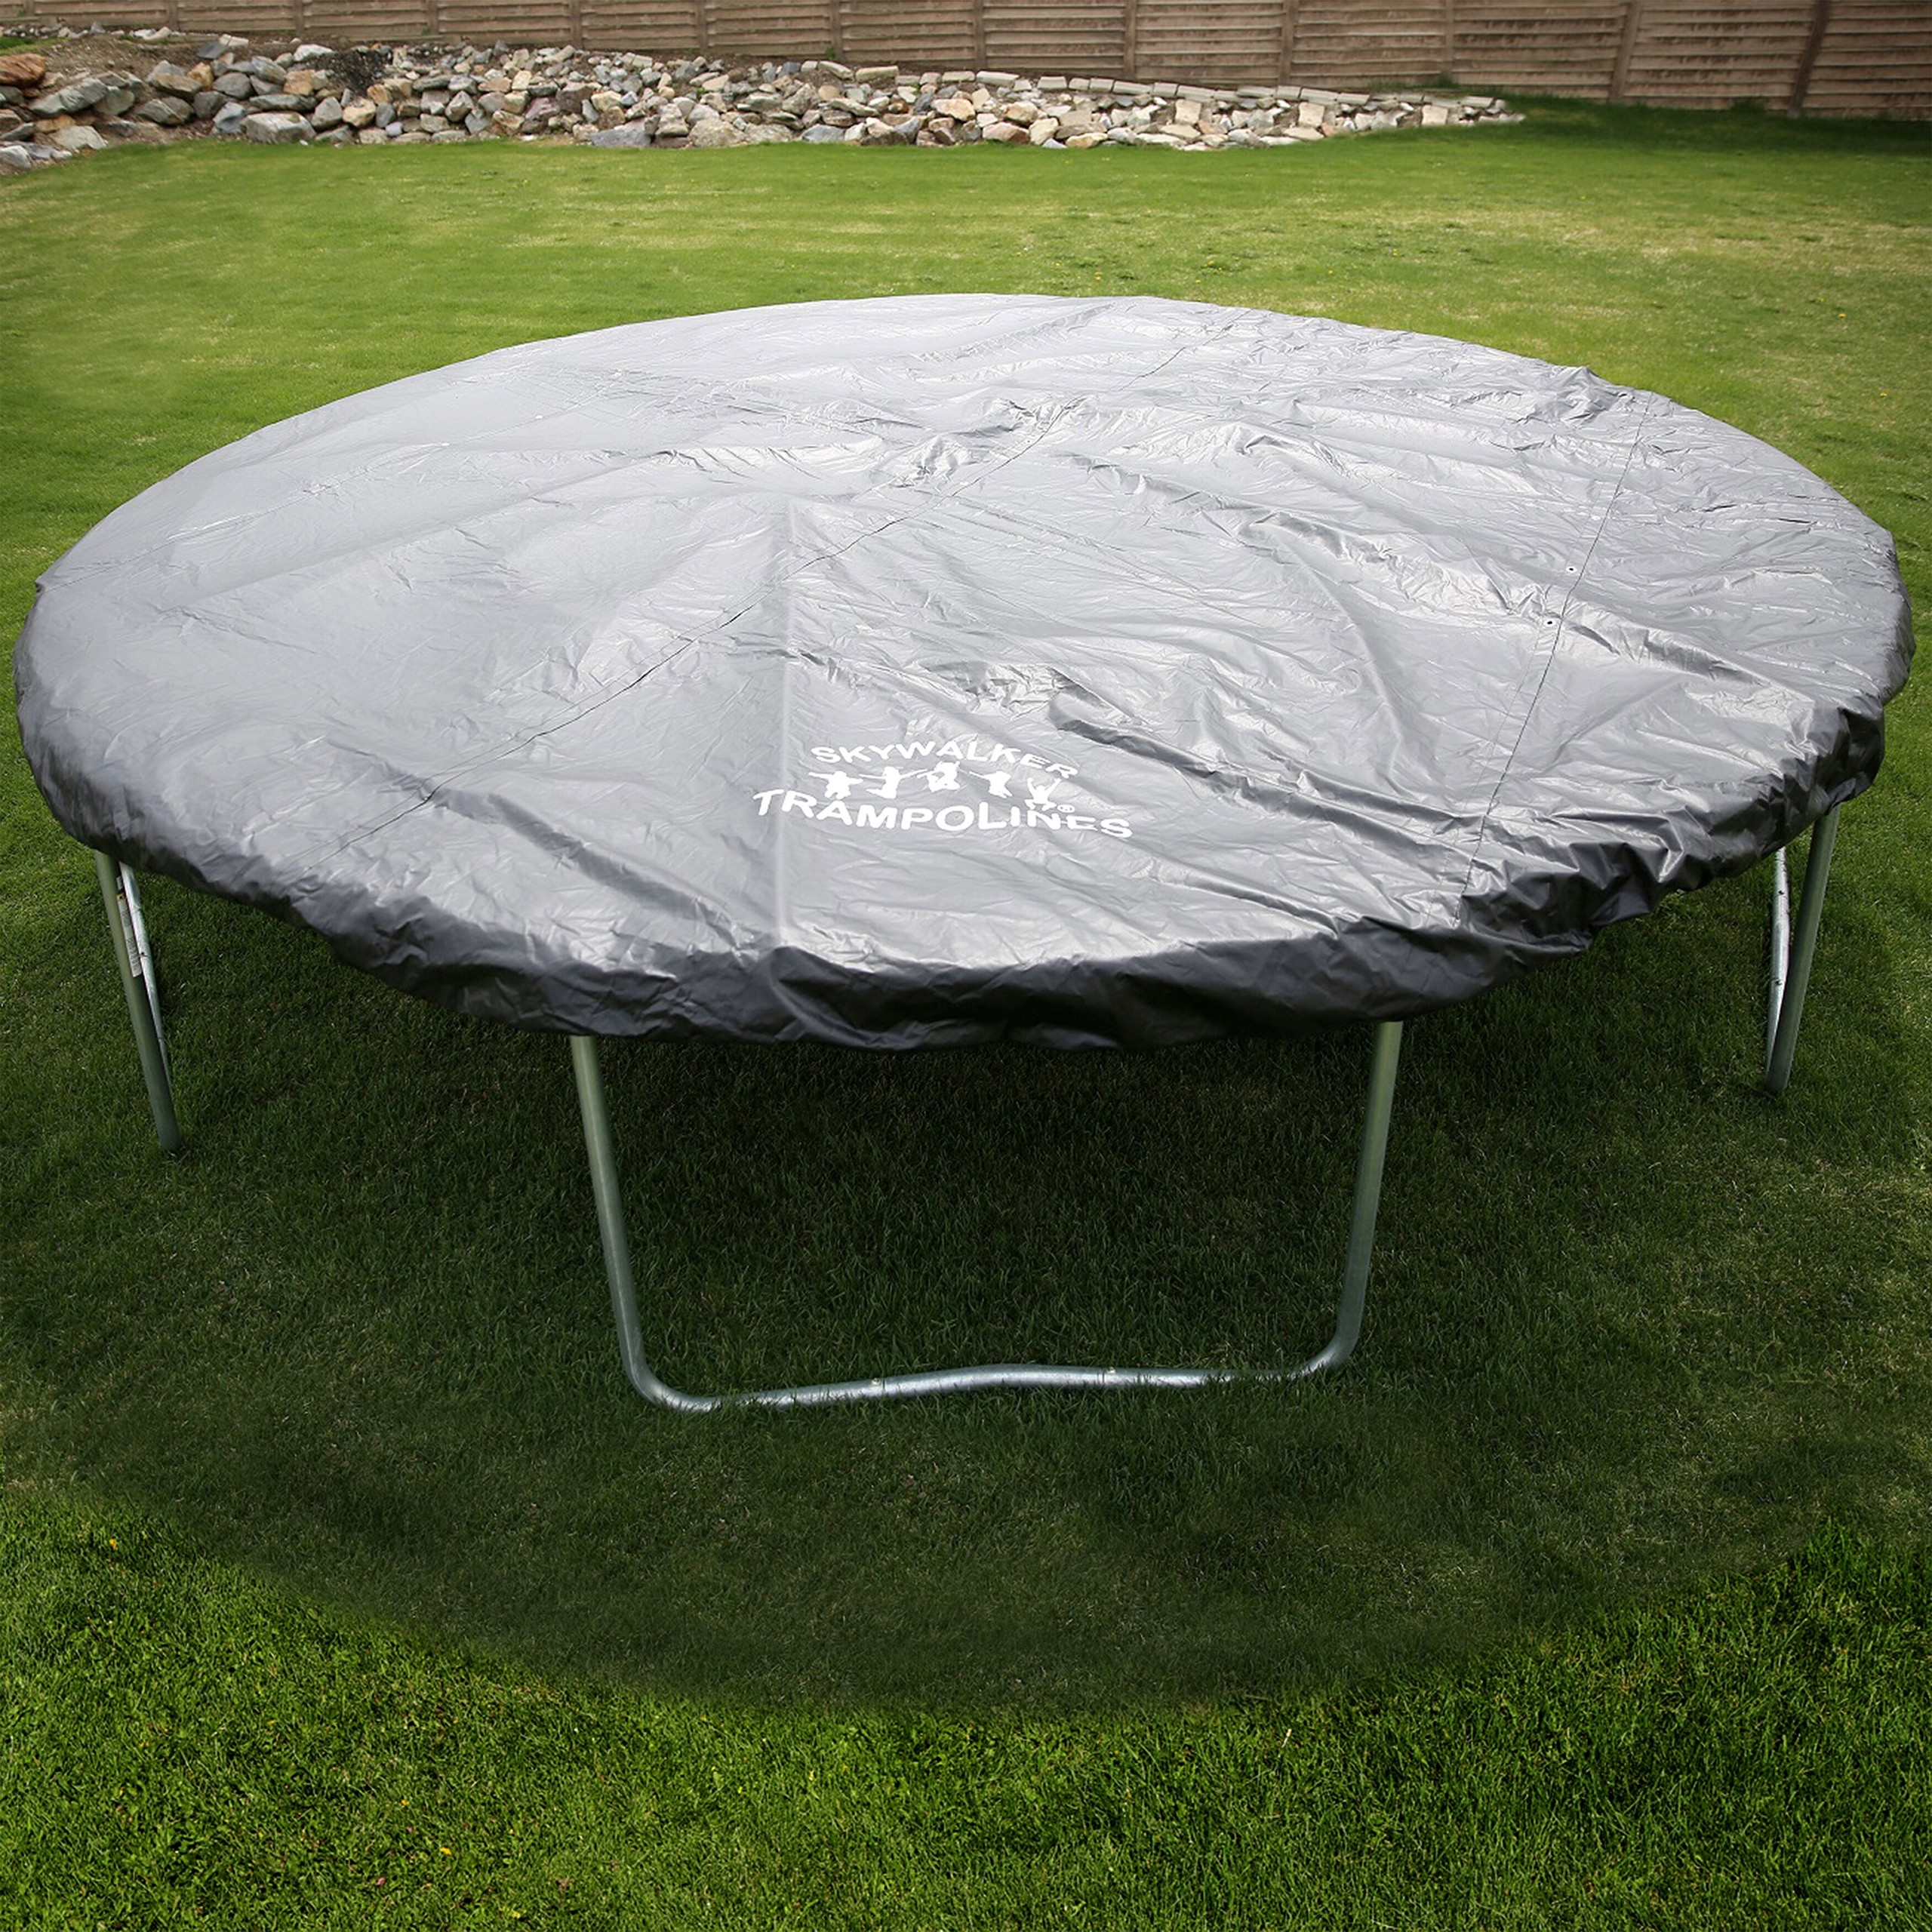 How to Care for a Trampoline 